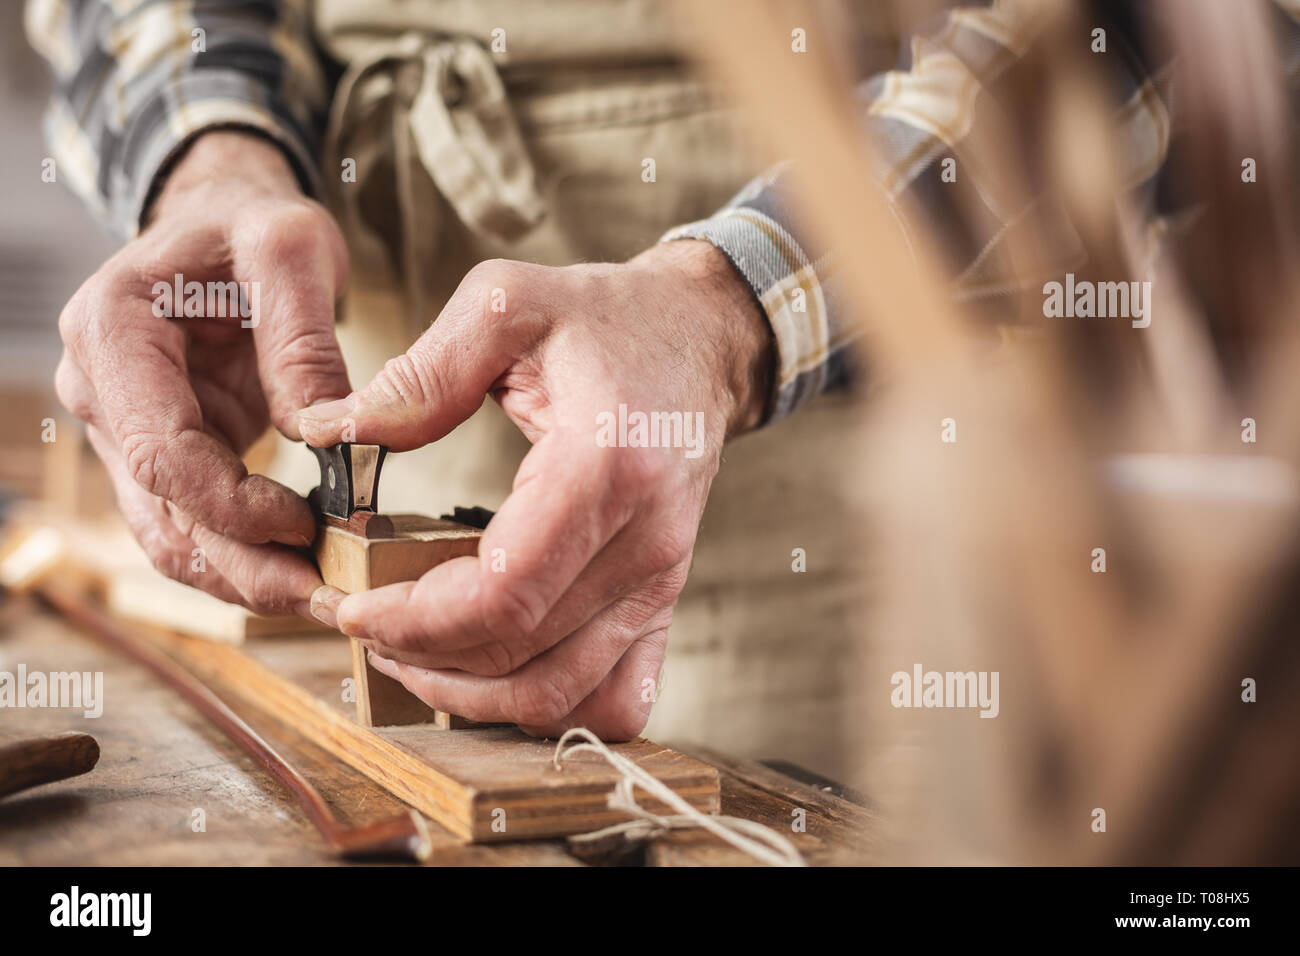 Hands of an instrument maker working on a violin bow Stock Photo